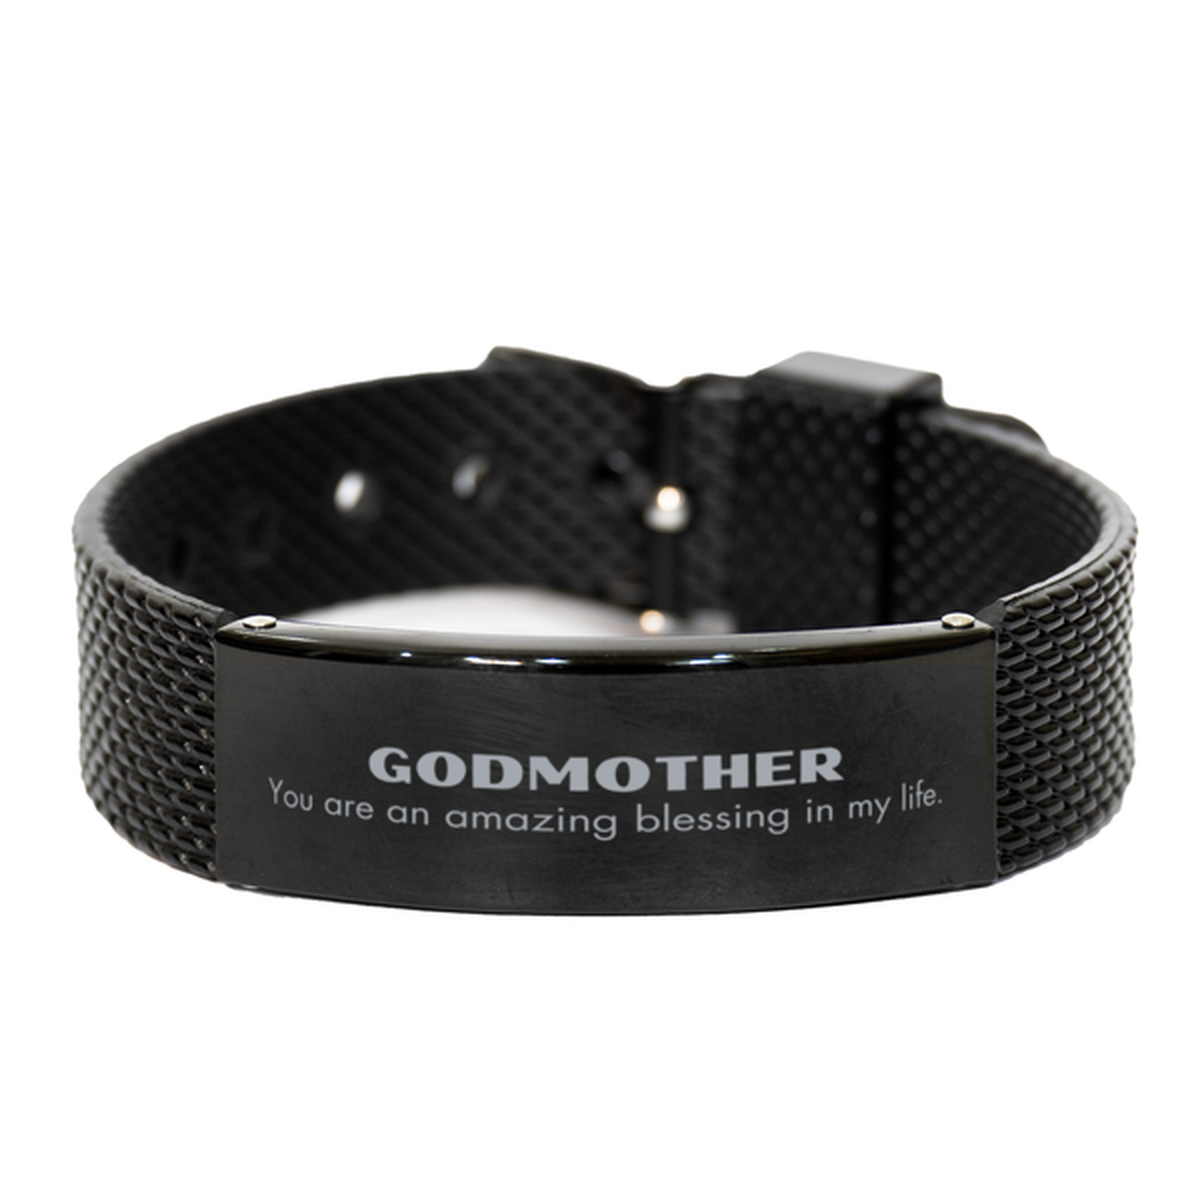 Godmother Black Shark Mesh Bracelet, You are an amazing blessing in my life, Thank You Gifts For Godmother, Inspirational Birthday Christmas Unique Gifts For Godmother